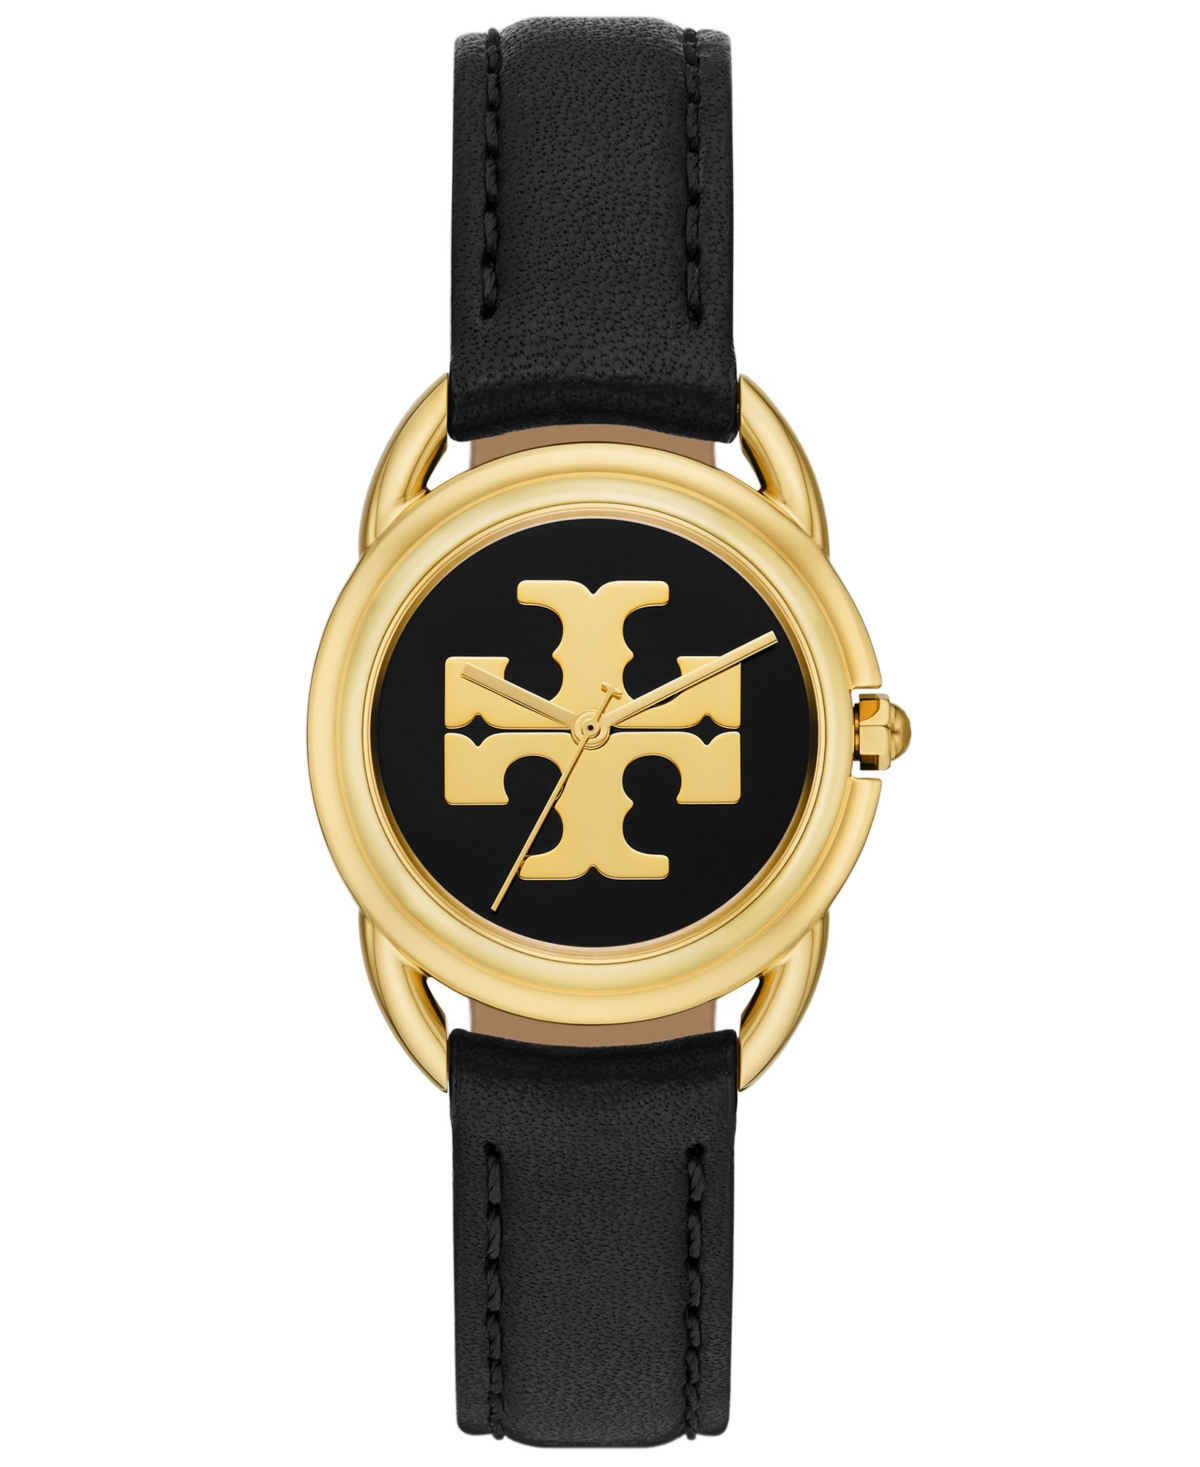 Tory Burch Women's The Miller Black Leather Strap Watch 32mm